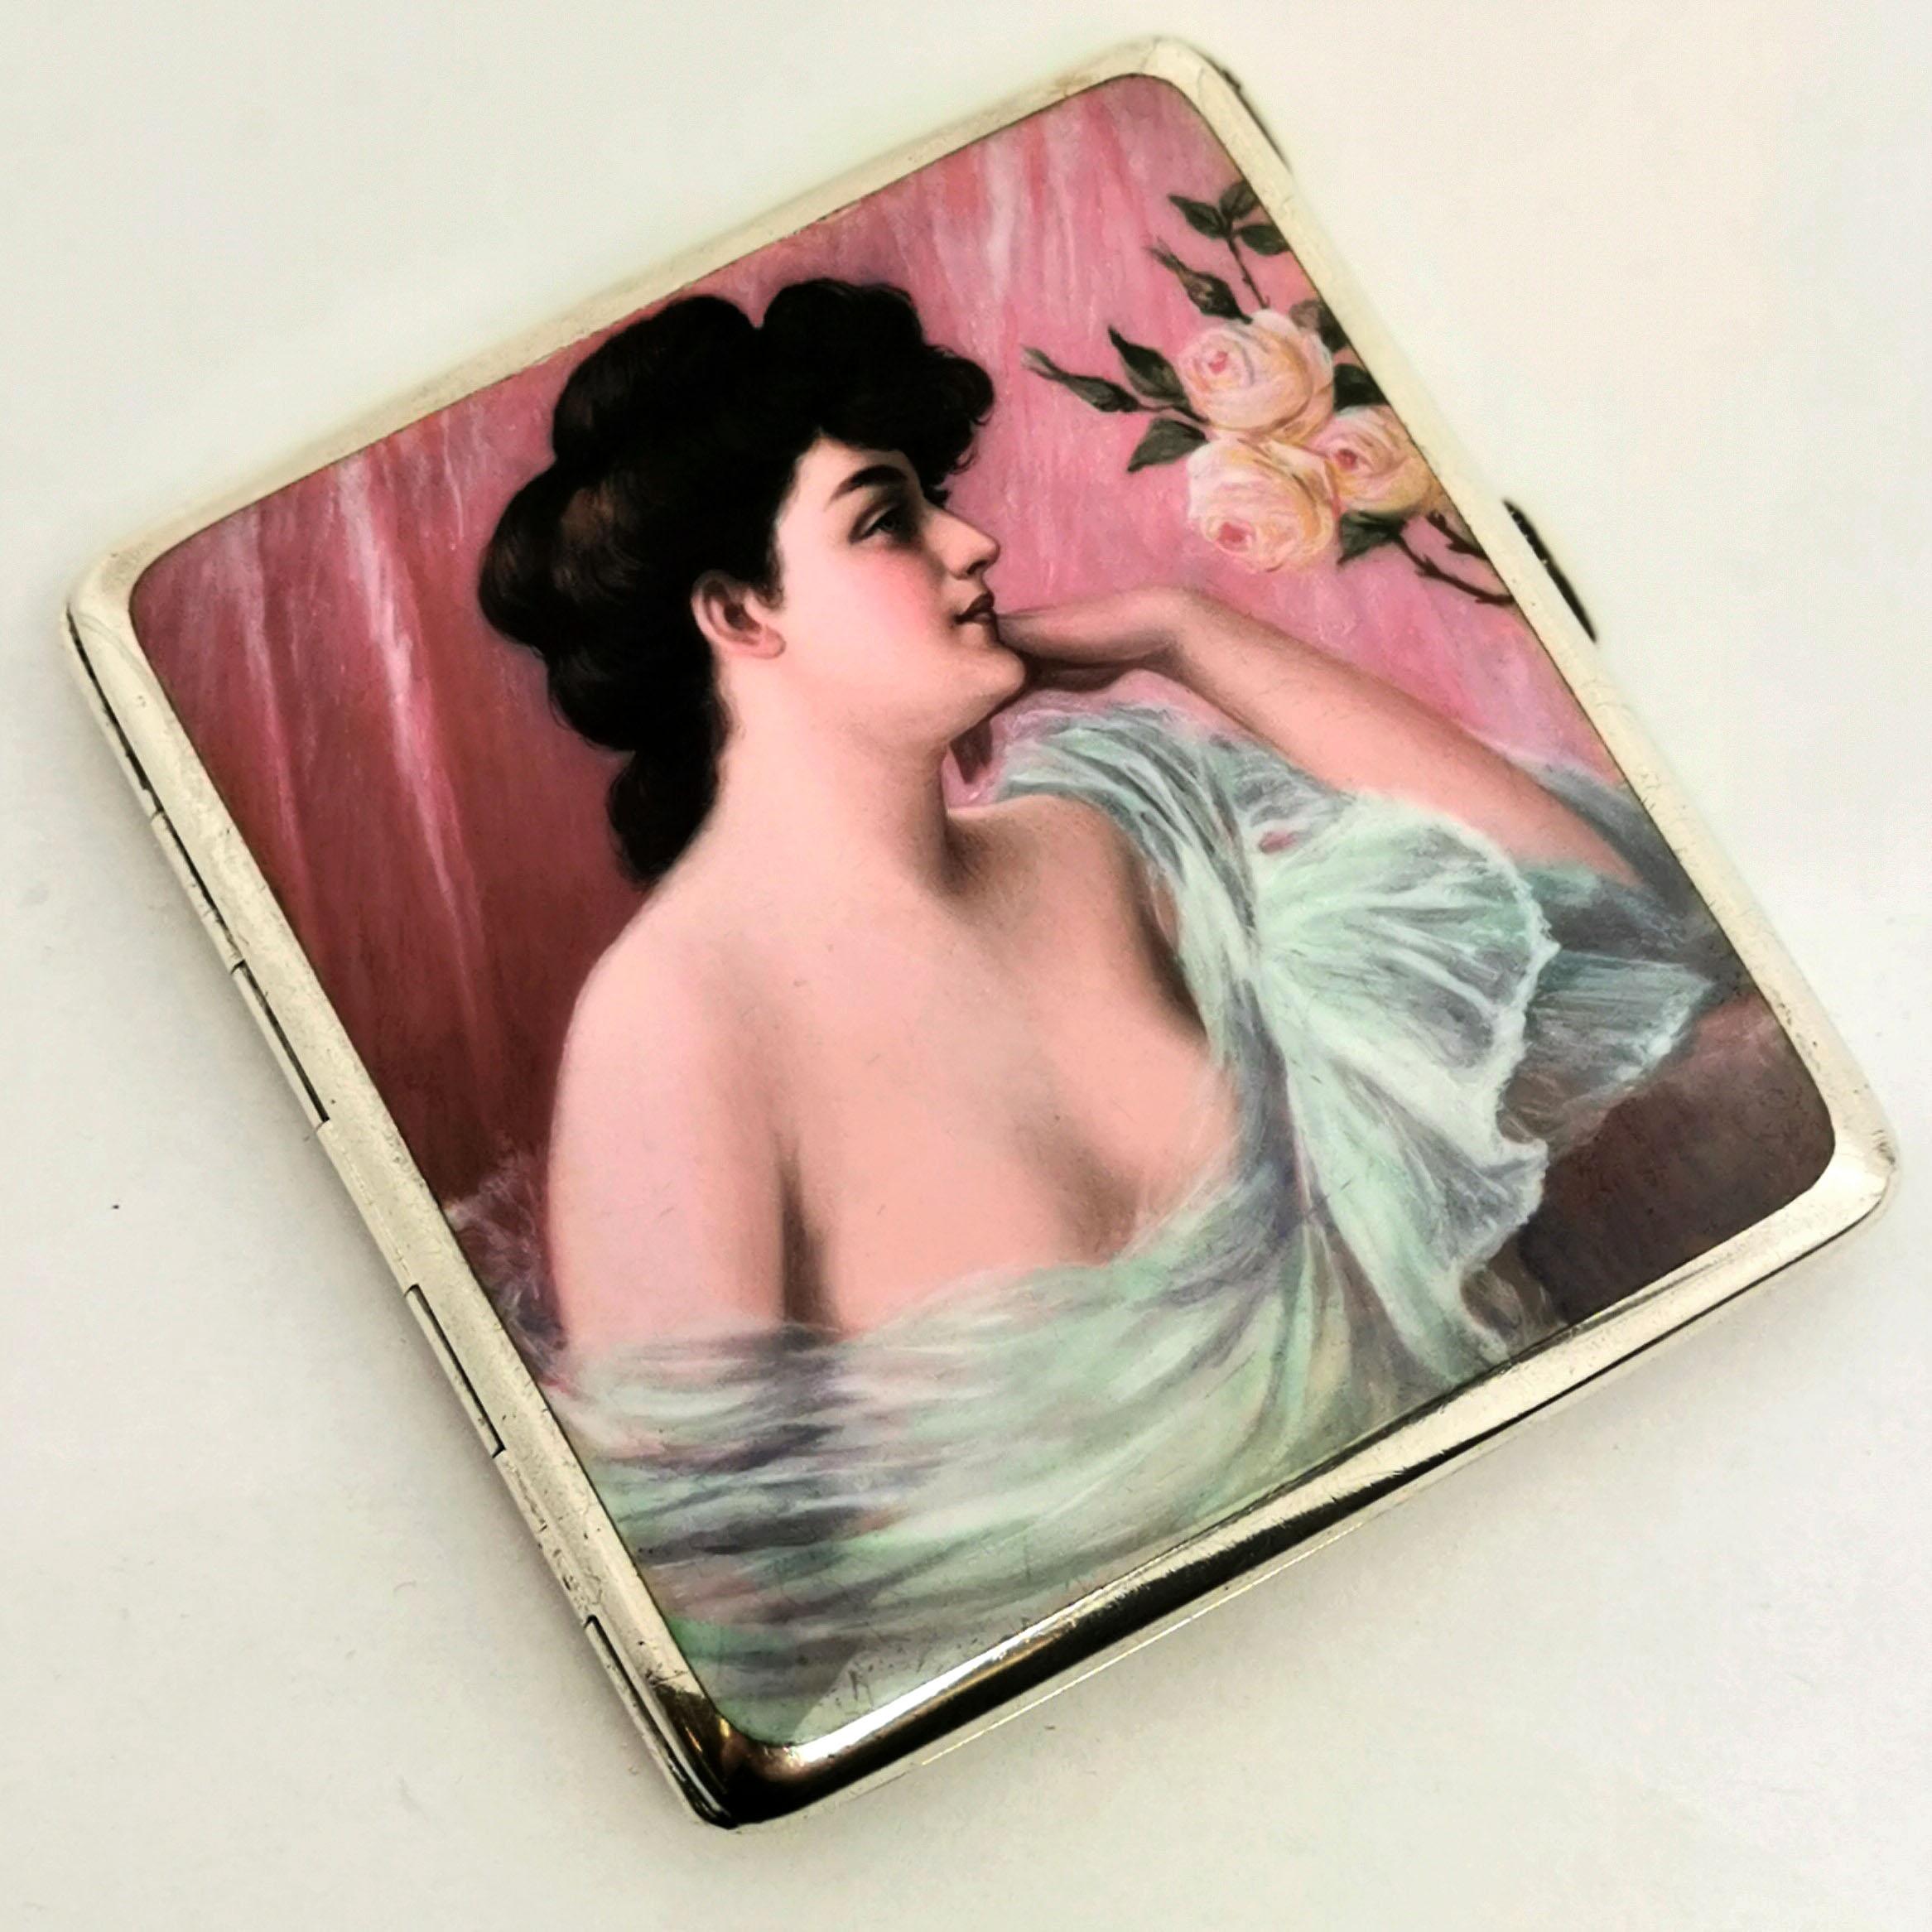 A beautiful antique German solid Silver Cigarette Case with an enamel image on the front cover. This image shows a woman gazing at three lush pink roses with her translucent gown draped low over her chest. The back cover is plain polished silver and